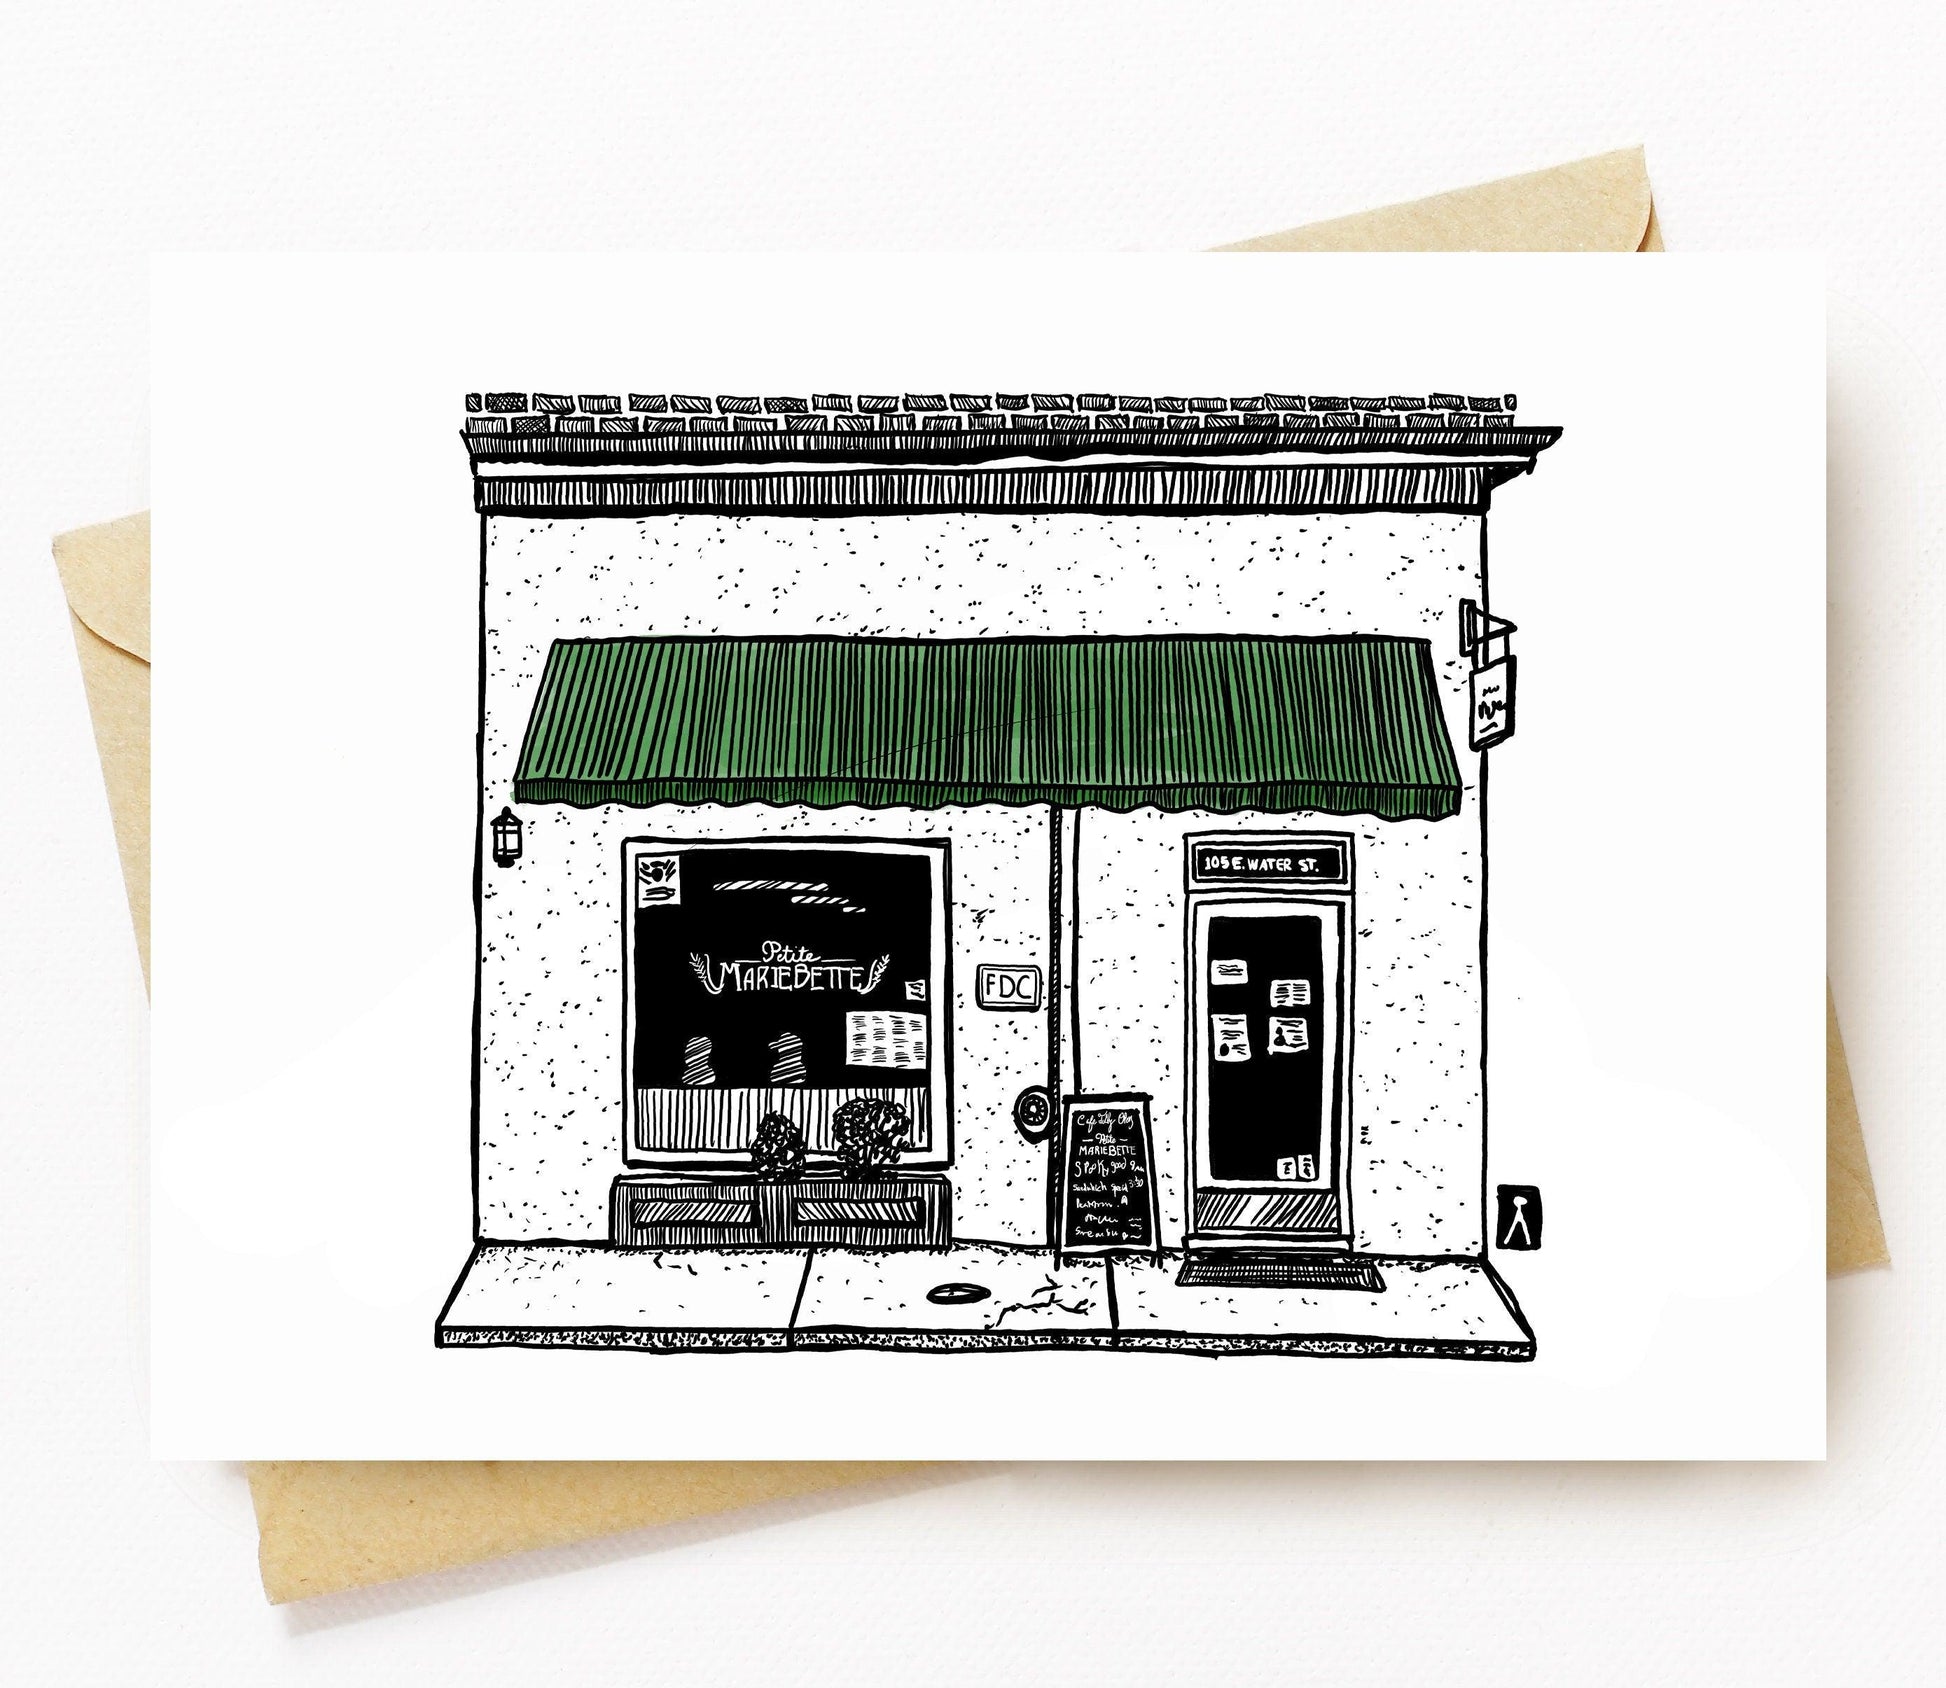 BellavanceInk: Greeting Card With A Pen & Ink Drawing Of MarieBette Petite Bakery in Charlottesville Virginia  5 x 7 Inches - BellavanceInk